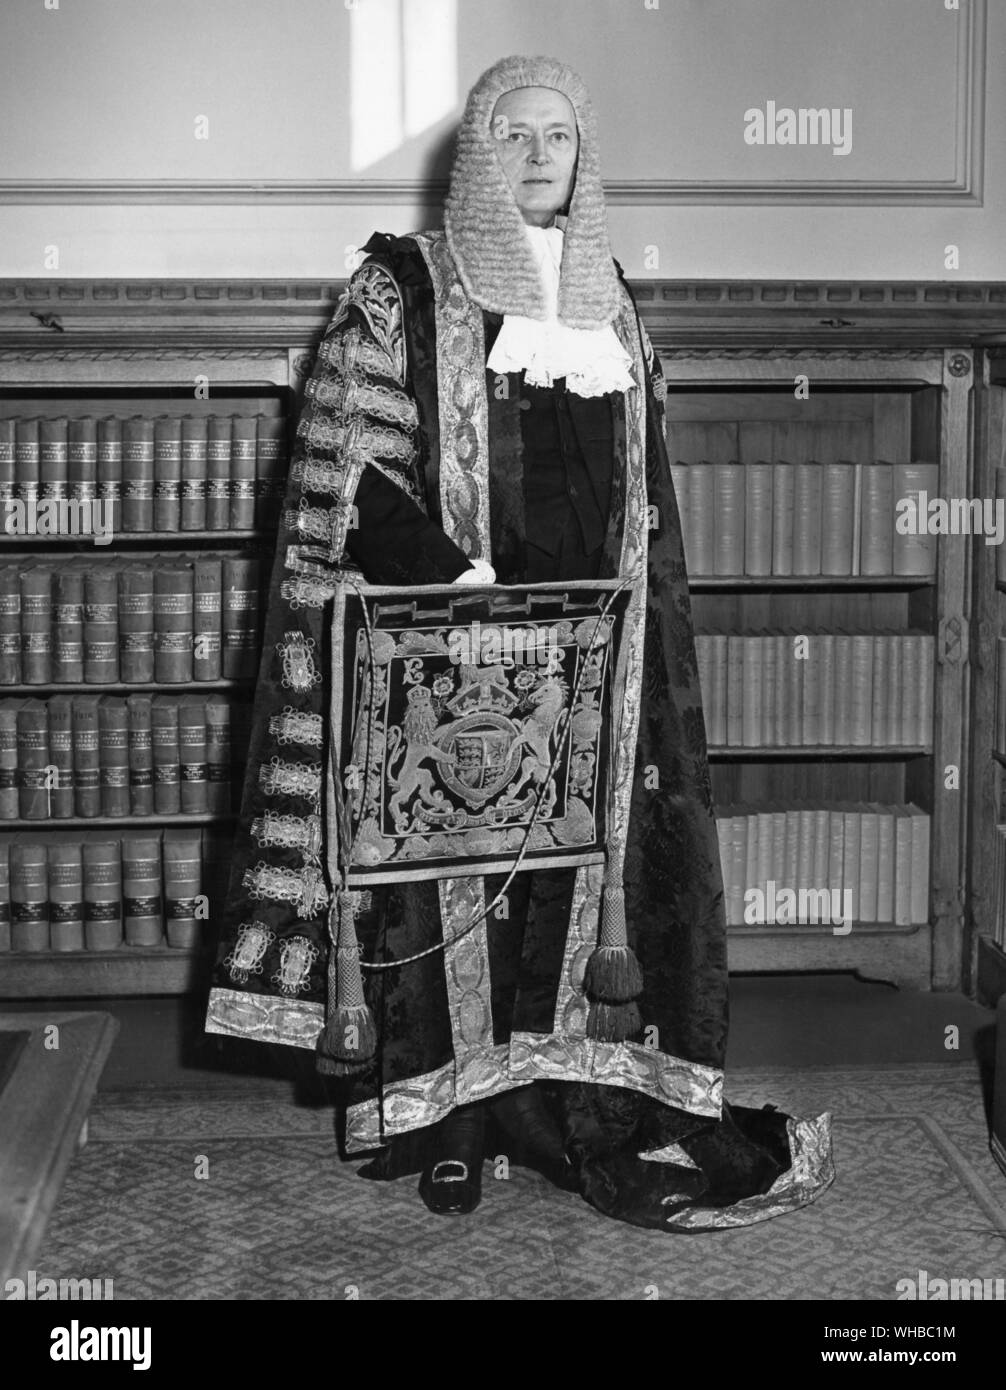 Lord Gardiner QC who was appointed Lord Chancellor after the General Election of October 1964 - . Gerald Austin Gardiner, Baron Gardiner, CH KC PC (30 May 1900-7 January 1990) was Lord Chancellor from 1964 to 1970 and during that time he introduced into British law as many reforms as any Lord Chancellor had done before or since. In that position he embarked on a great programme of reform, most importantly setting up the Law Commission.. Stock Photo